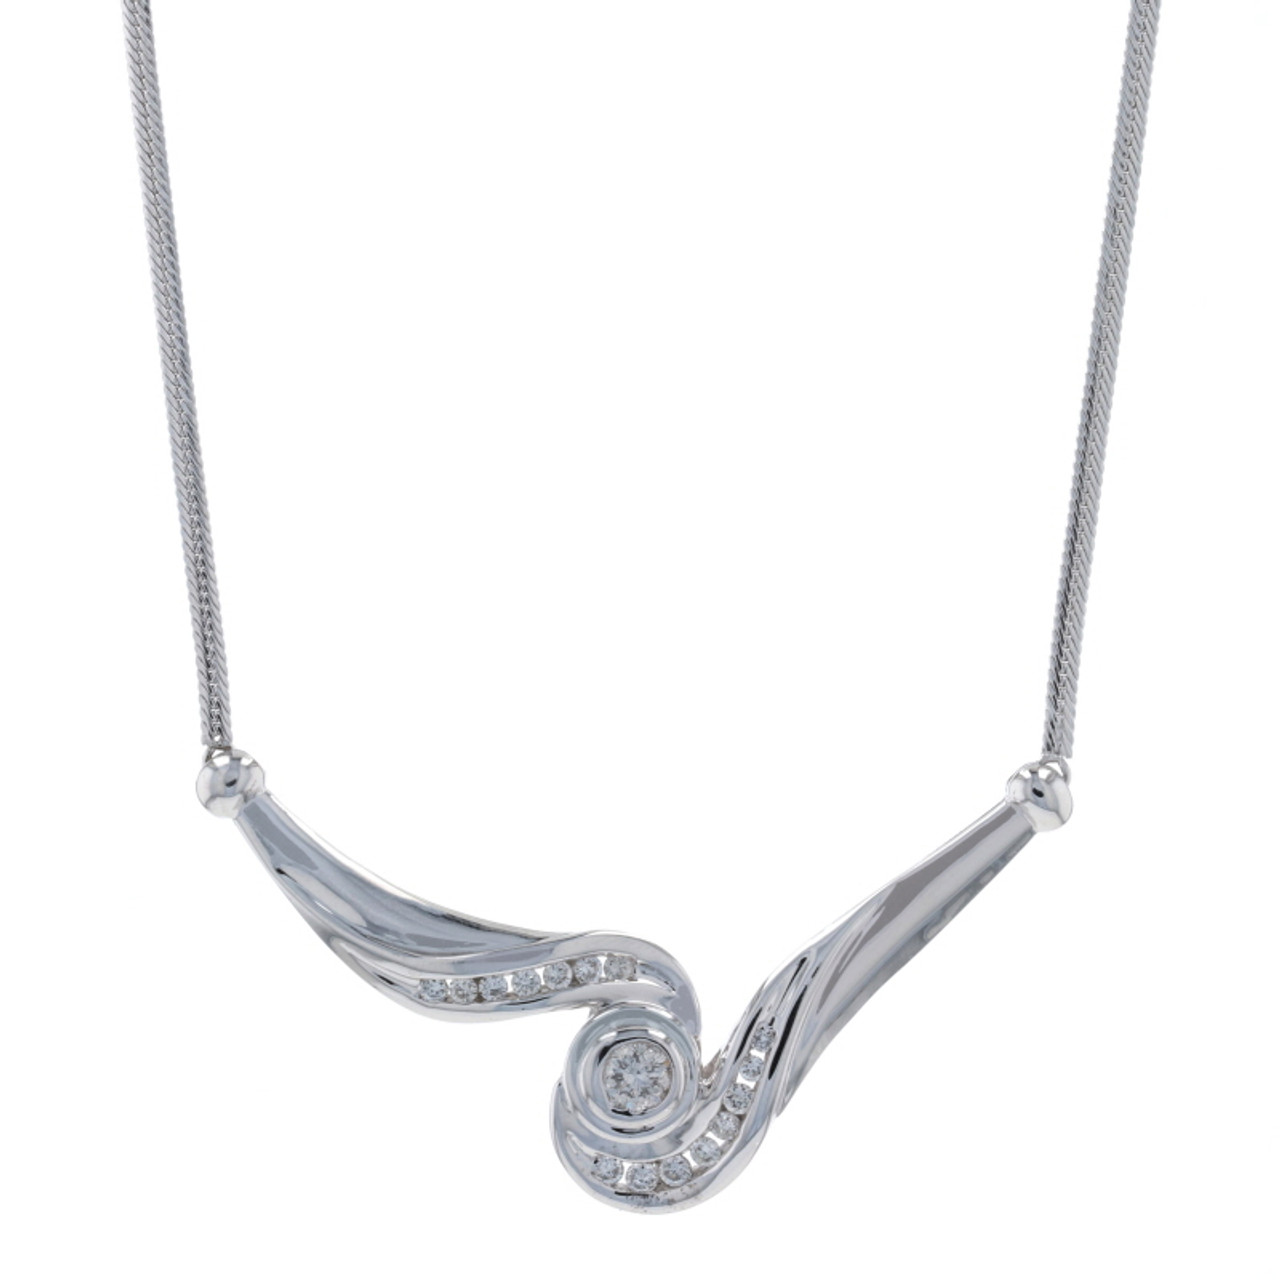 Spiral Corded 16-18 Necklace